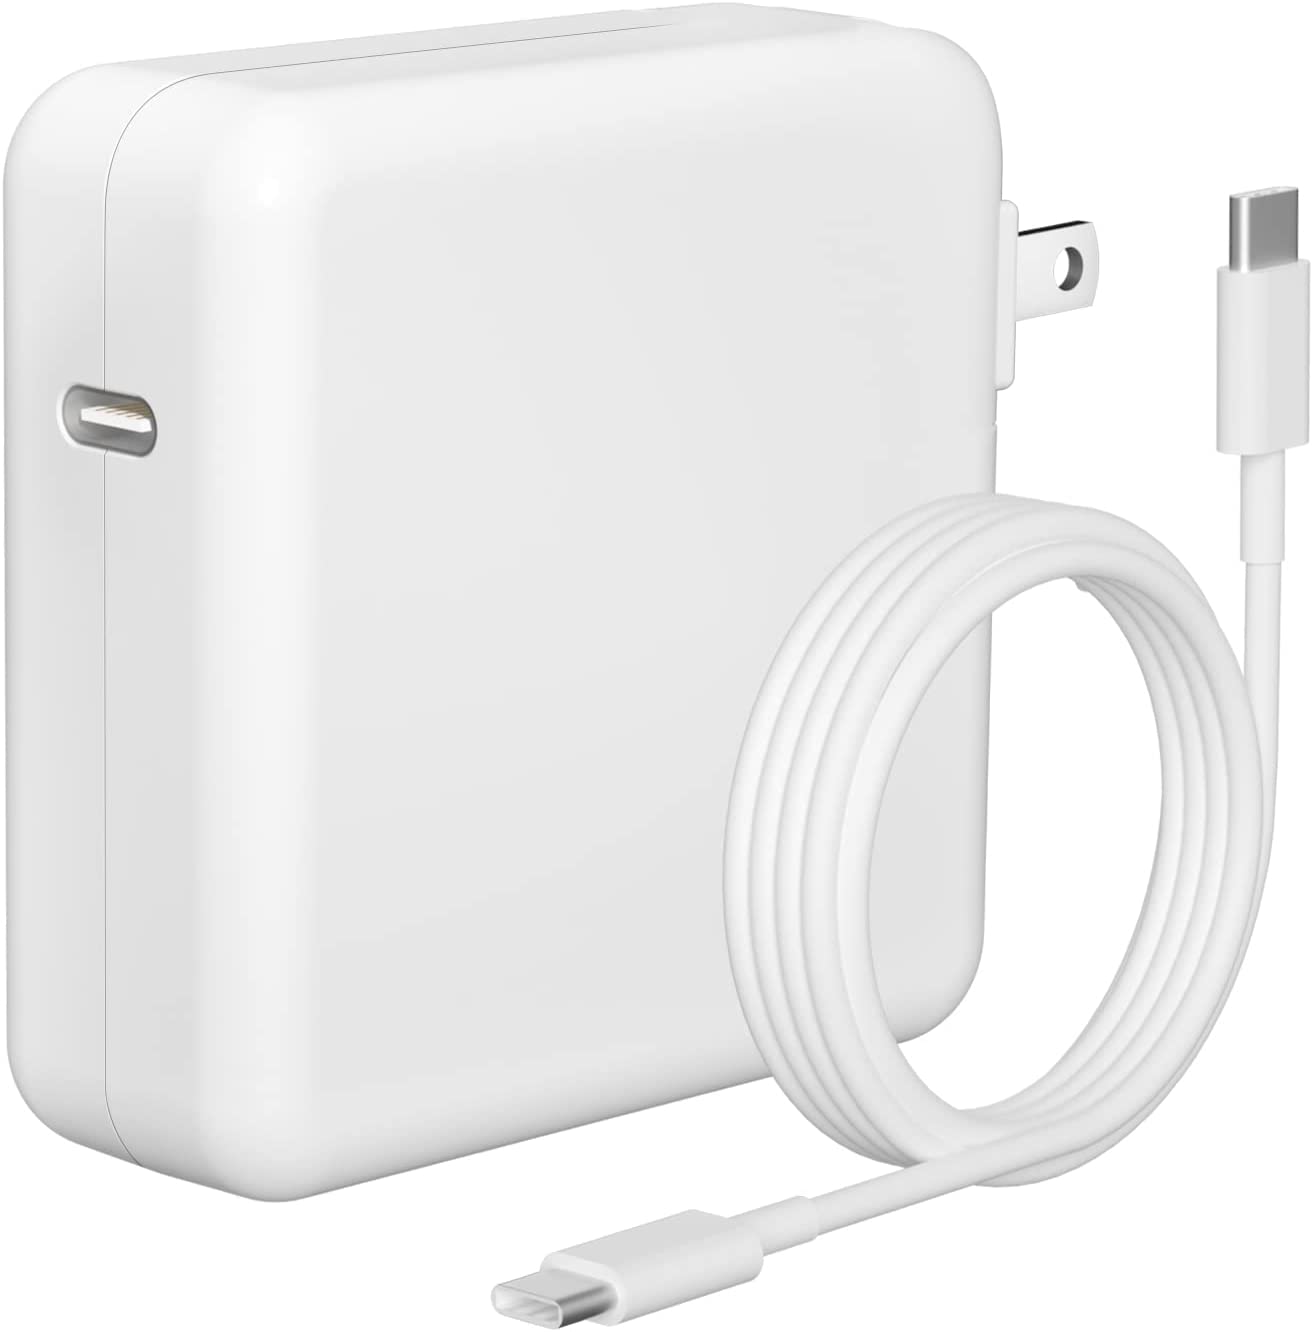 mavepine kærtegn Premonition Mac Book Pro Charger, 61W USB C Charger Power Adapter Compatible with Mac  Book Pro 13 Inch 15 Inch 2020 2019 2018, Laptop Power for Mac Book Air 13  inch, Type C,